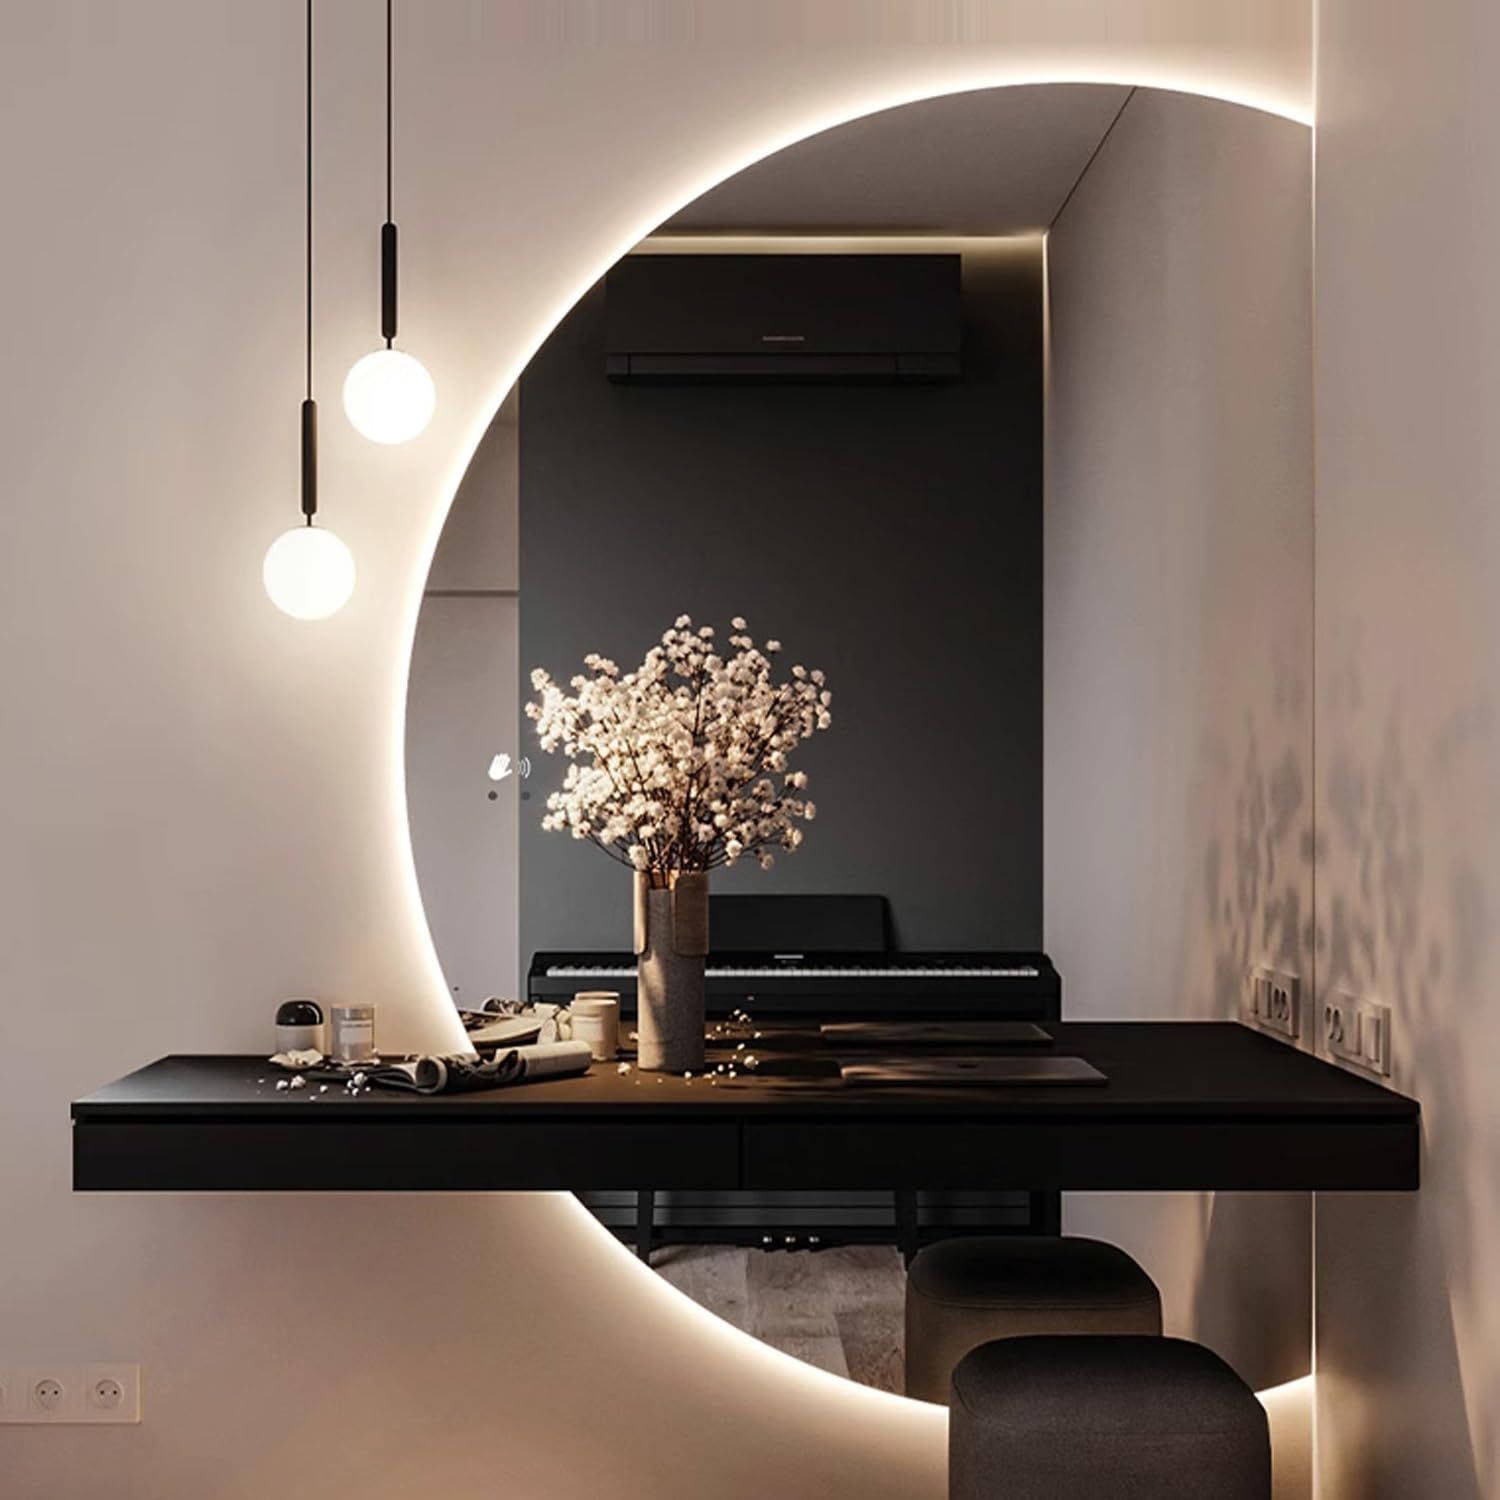 Enhance Your Living Room Decor with Stylish Mirrors